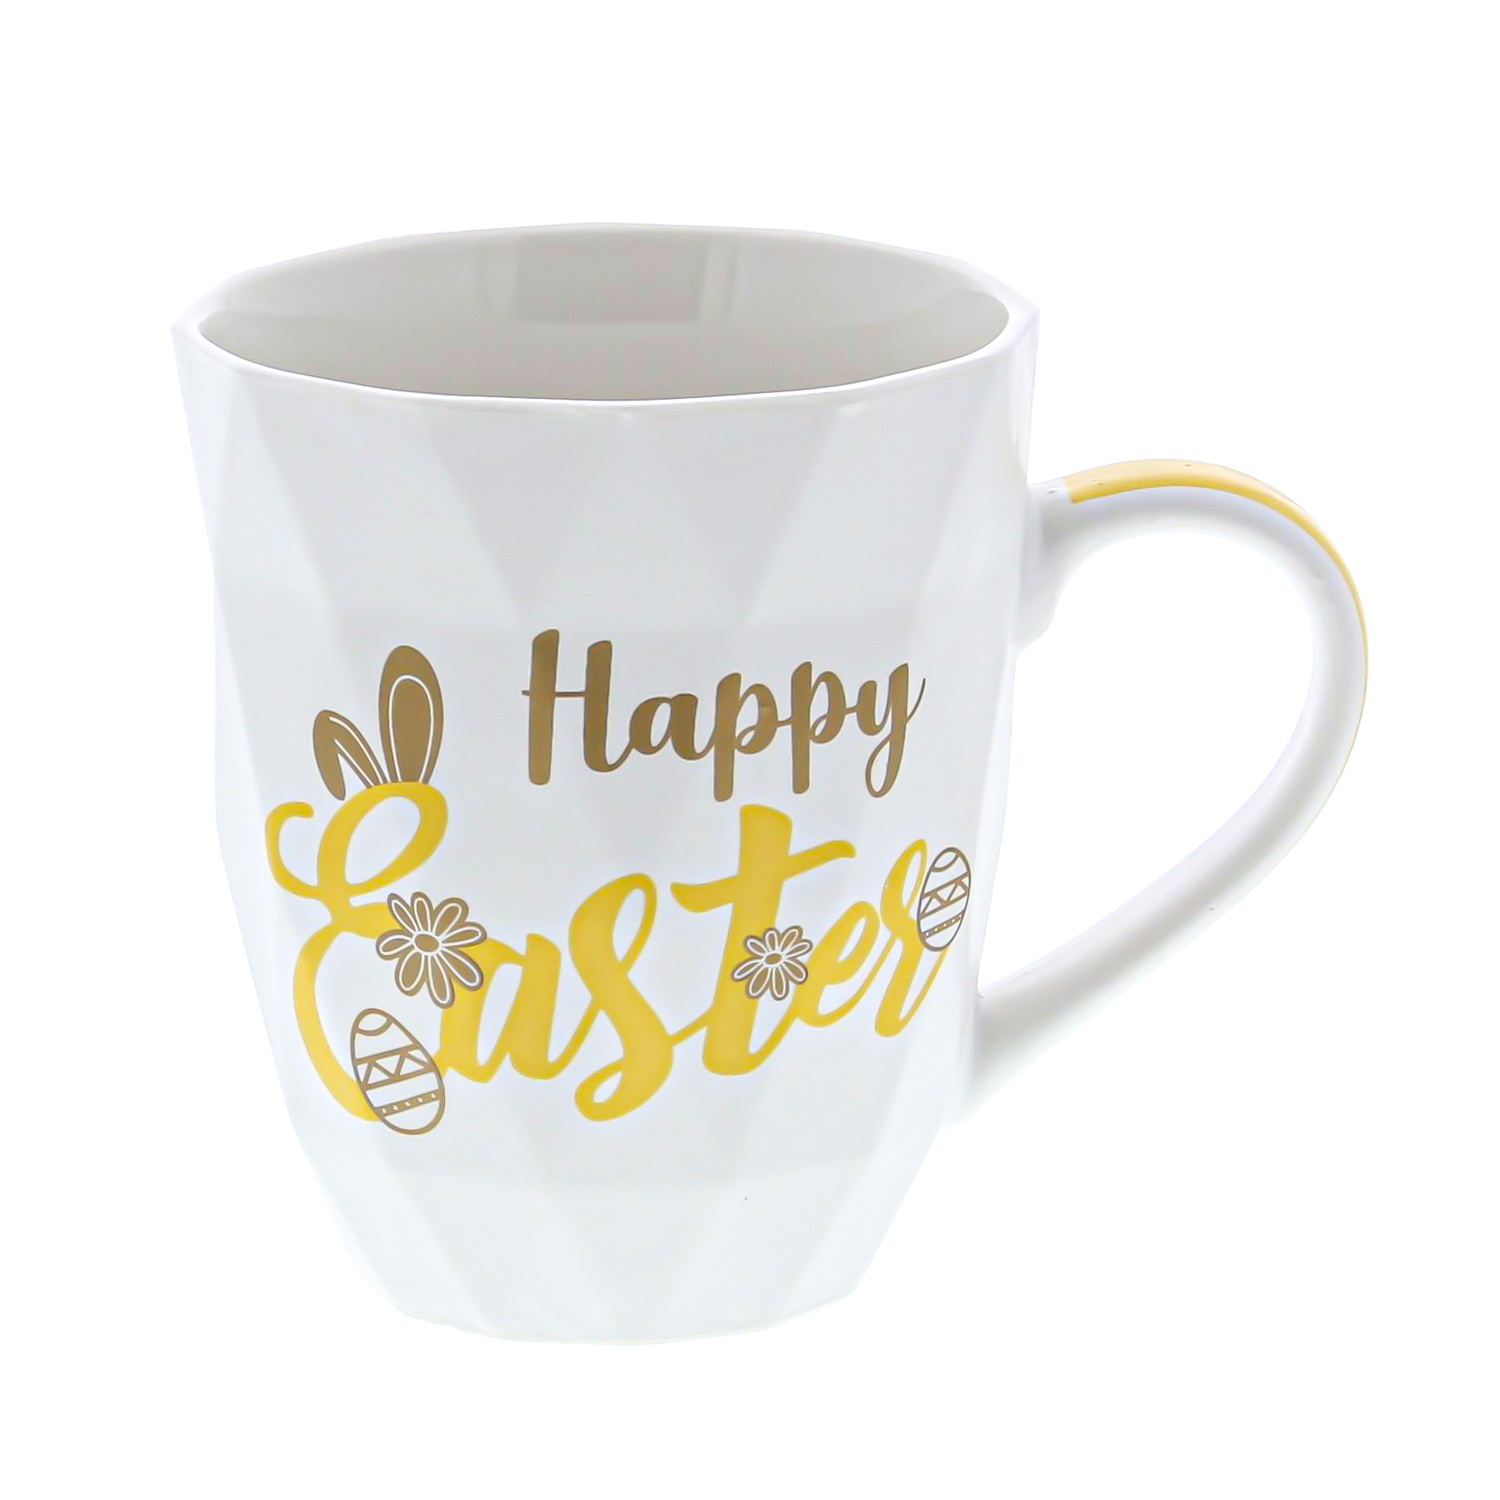 "Happy Easter" mug yellow/ gold -120*86*103 mm - 12 pieces